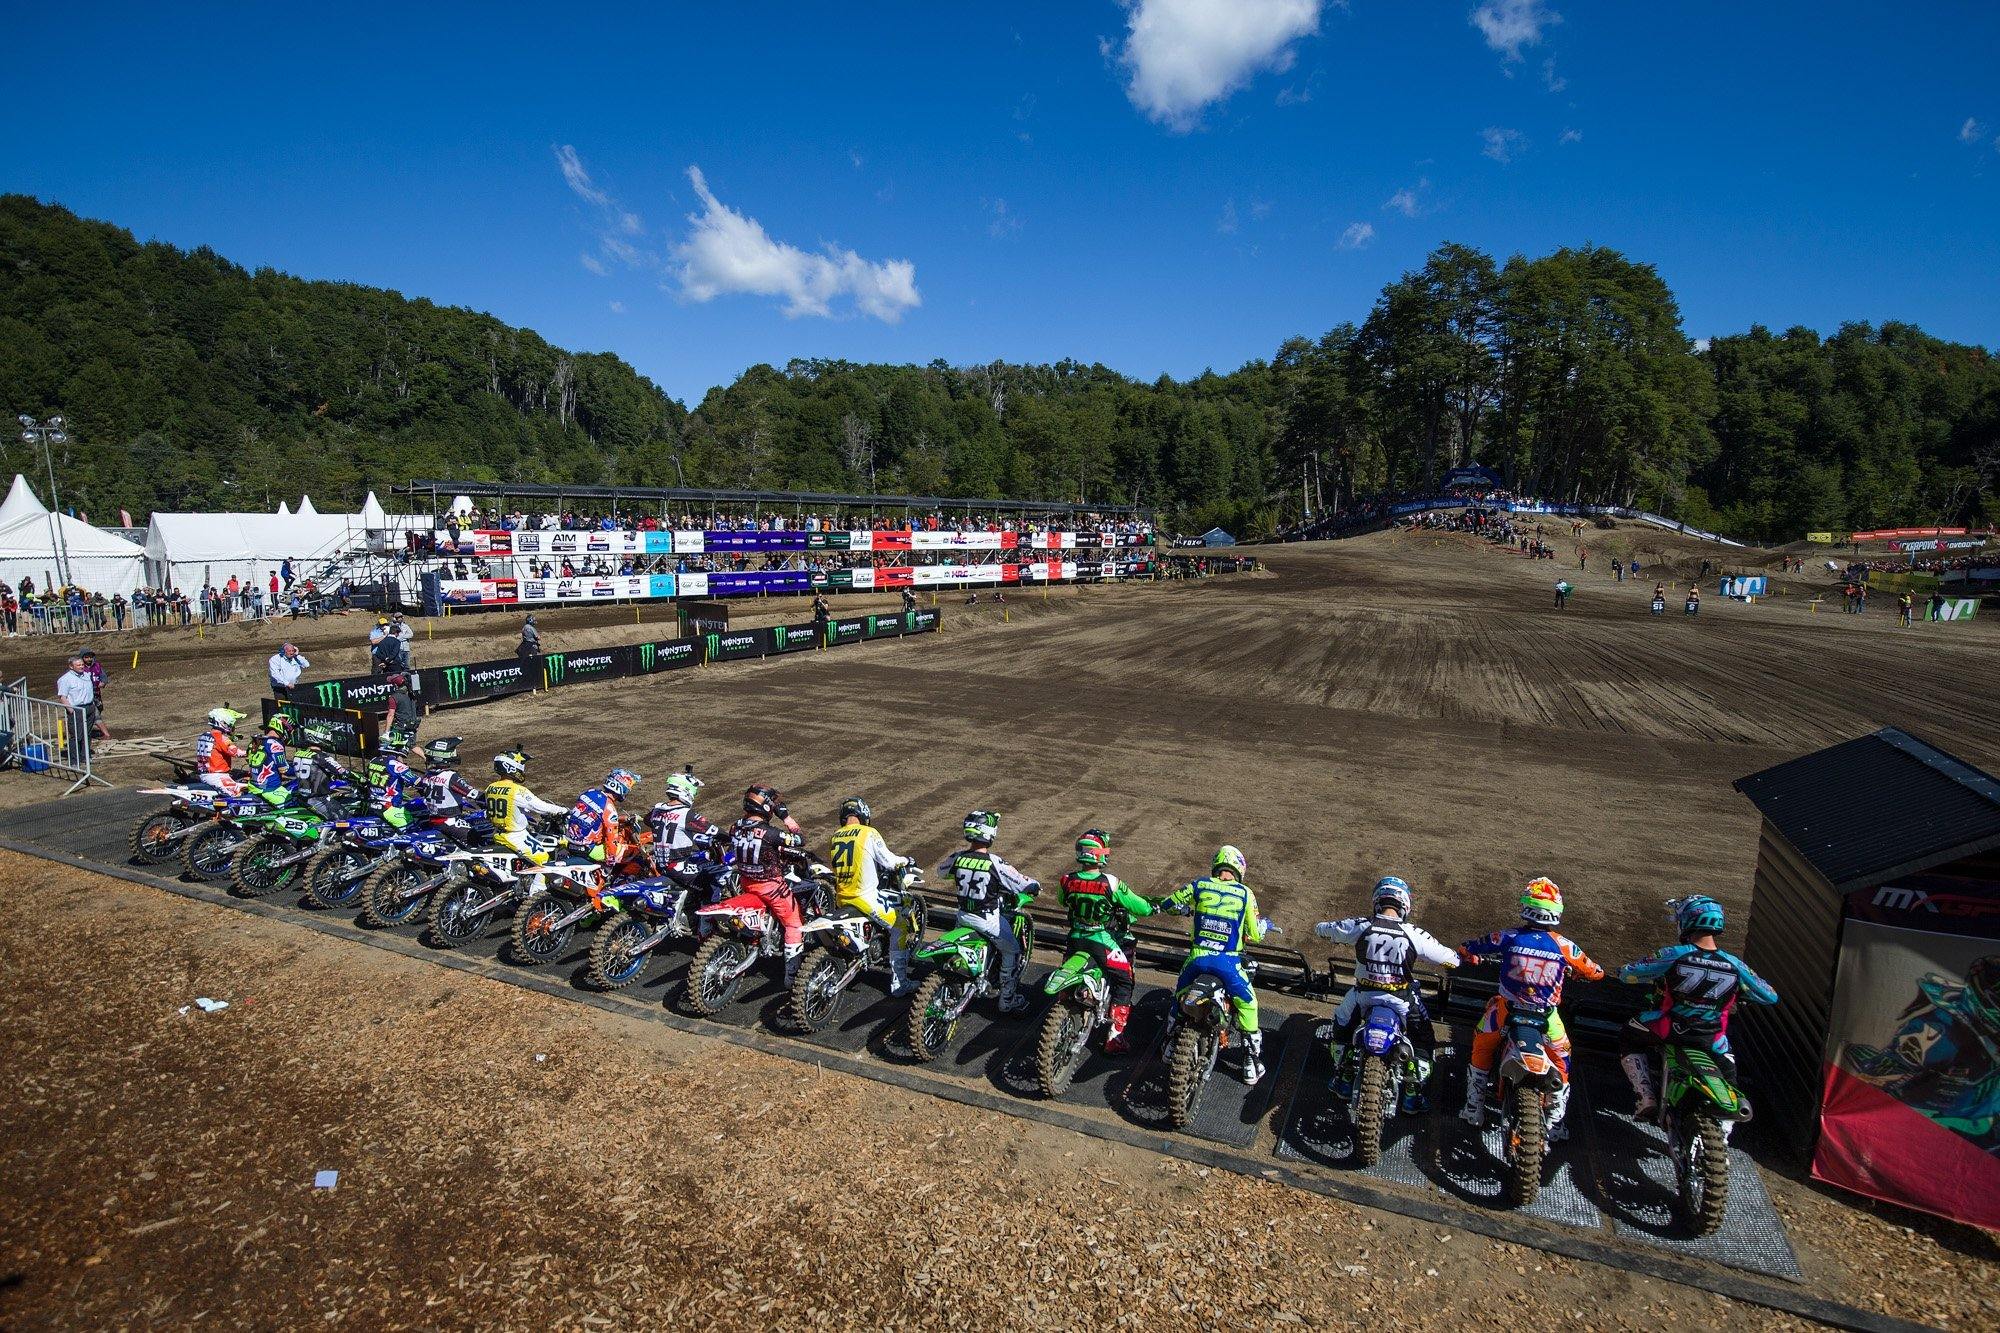 MXGP of Patagonia: The Season Gets Rolling - 100% Europe